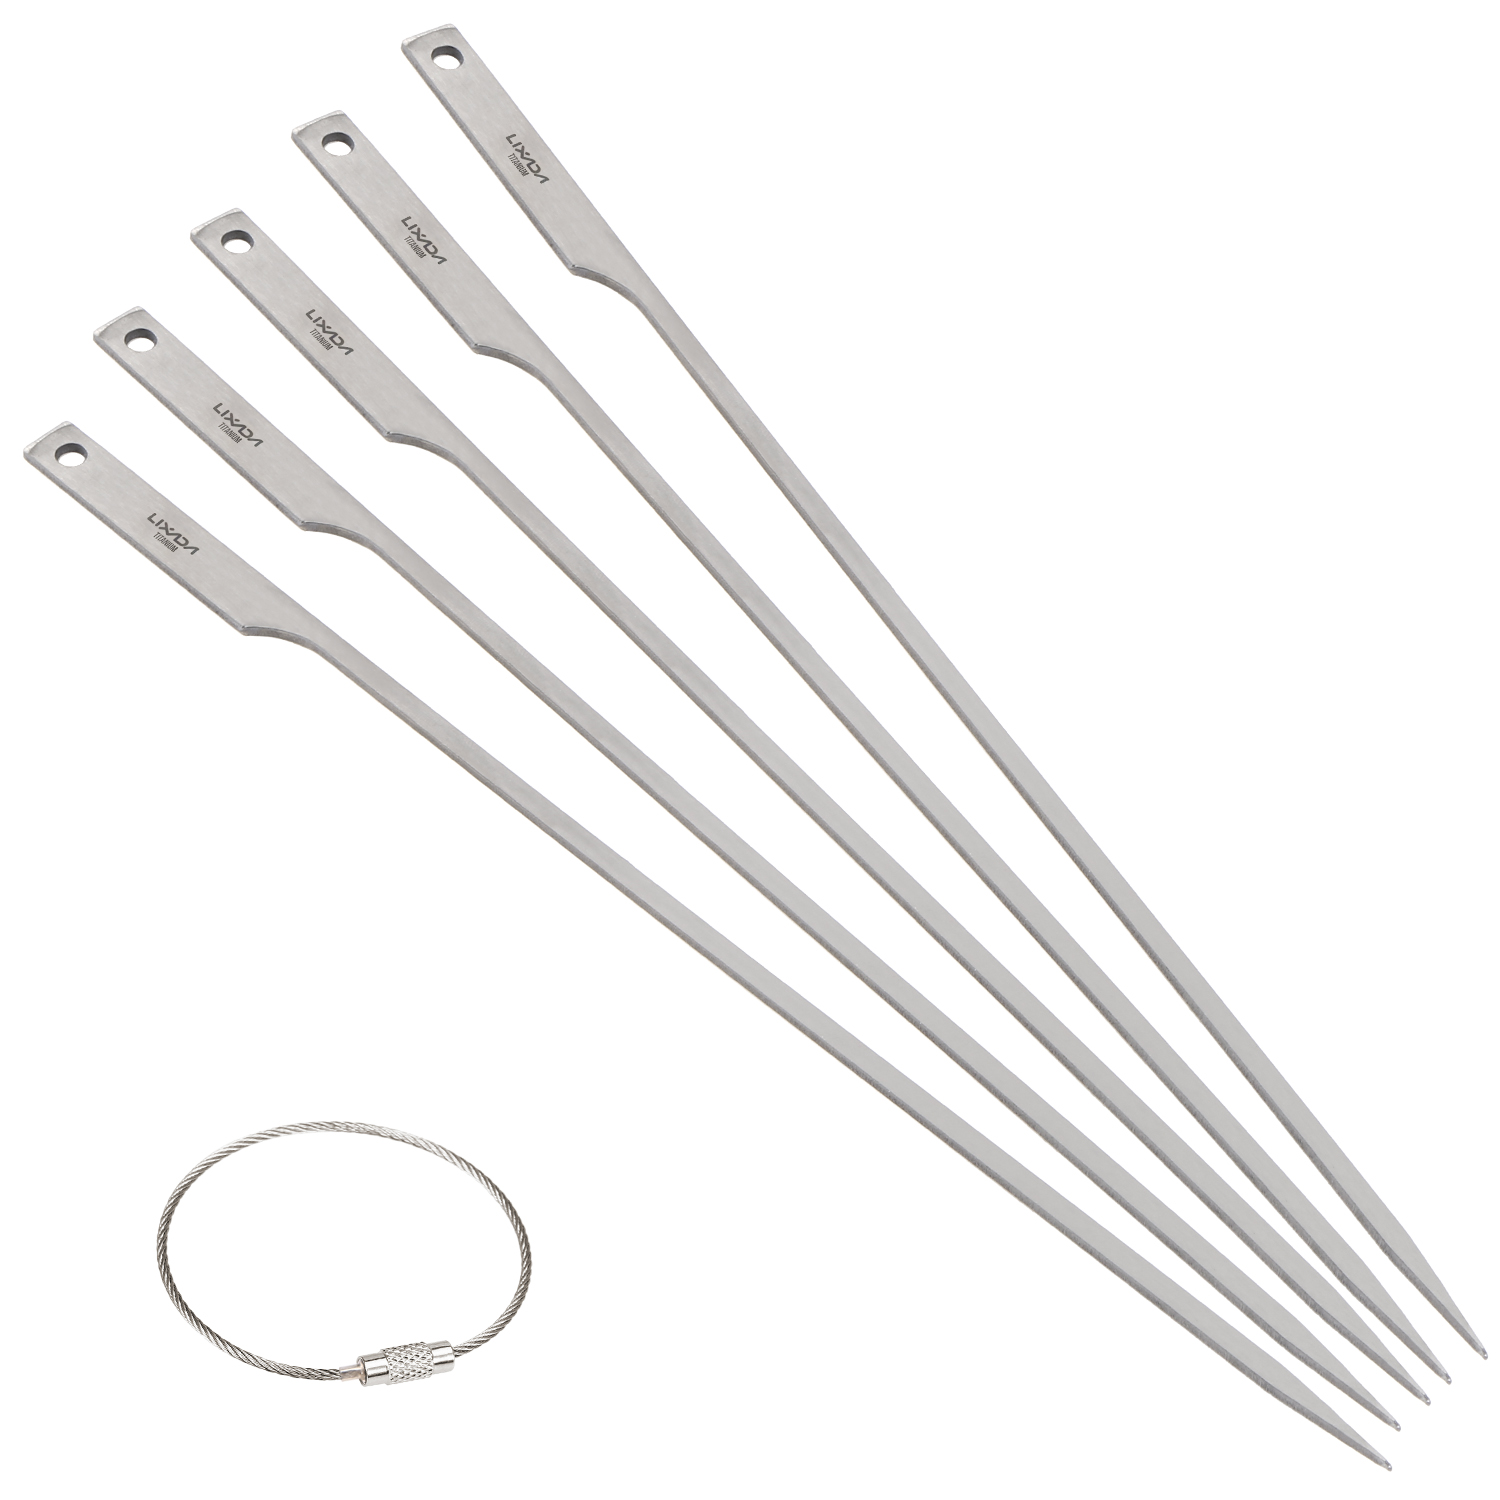 Lixada 5pcs 10 Inch Flat  Barbecue Skewers  Backyard Picnic BBQ Grilling Kabob Skewers BBQ  with Wire Ring - image 5 of 7